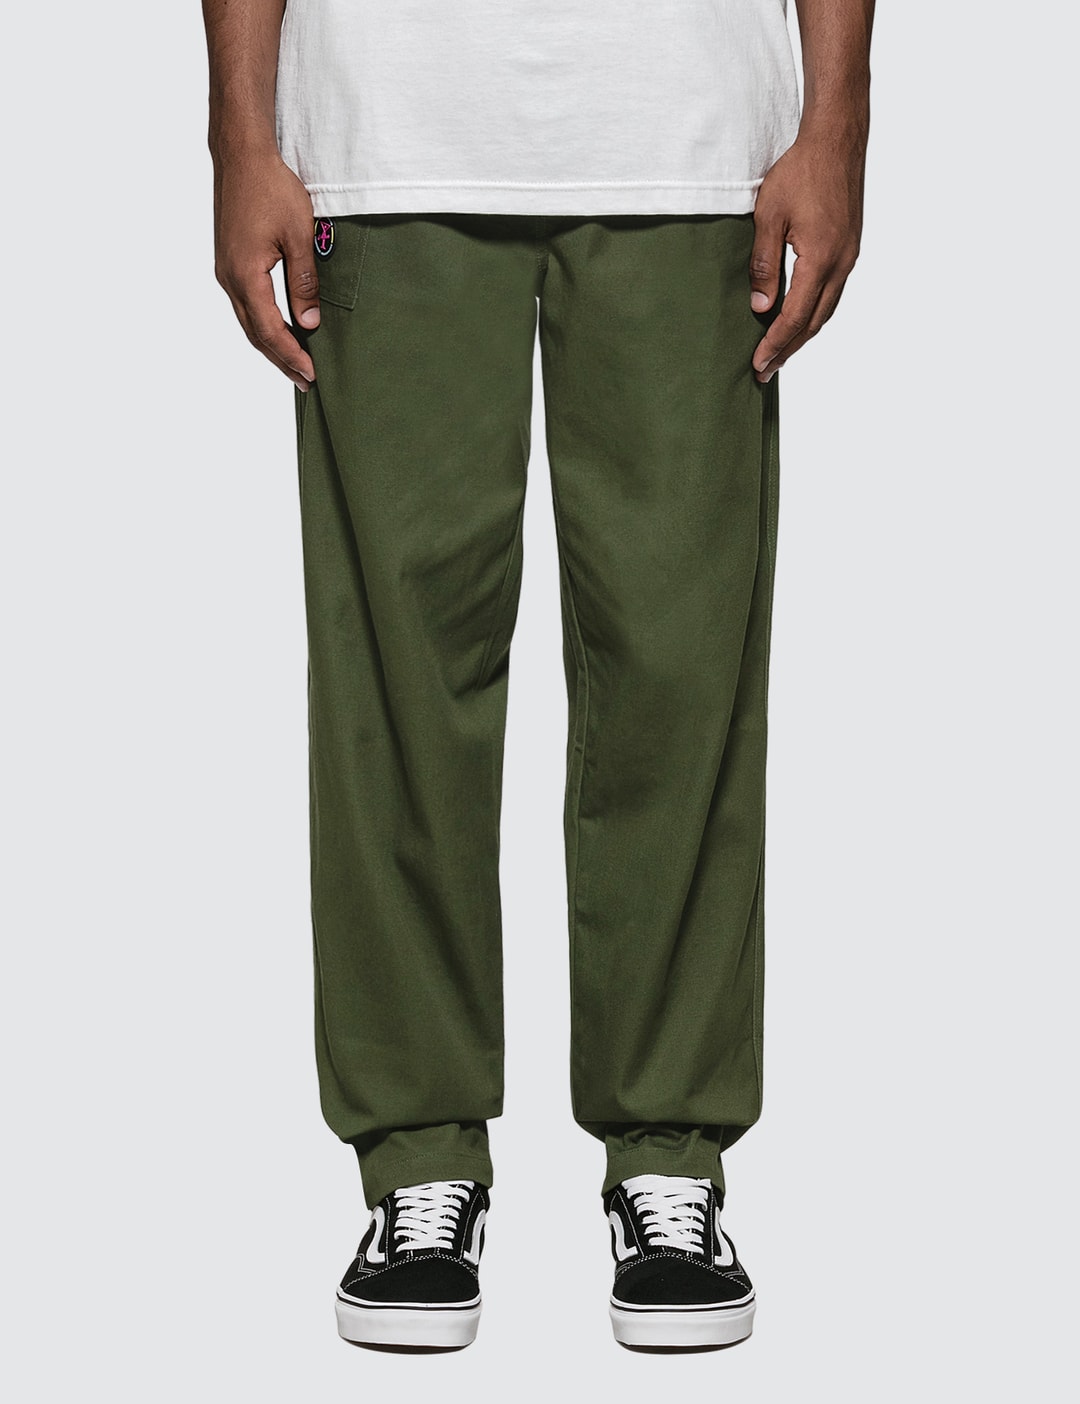 Alltimers - Yacht Rental Pants | HBX - Globally Curated Fashion and ...